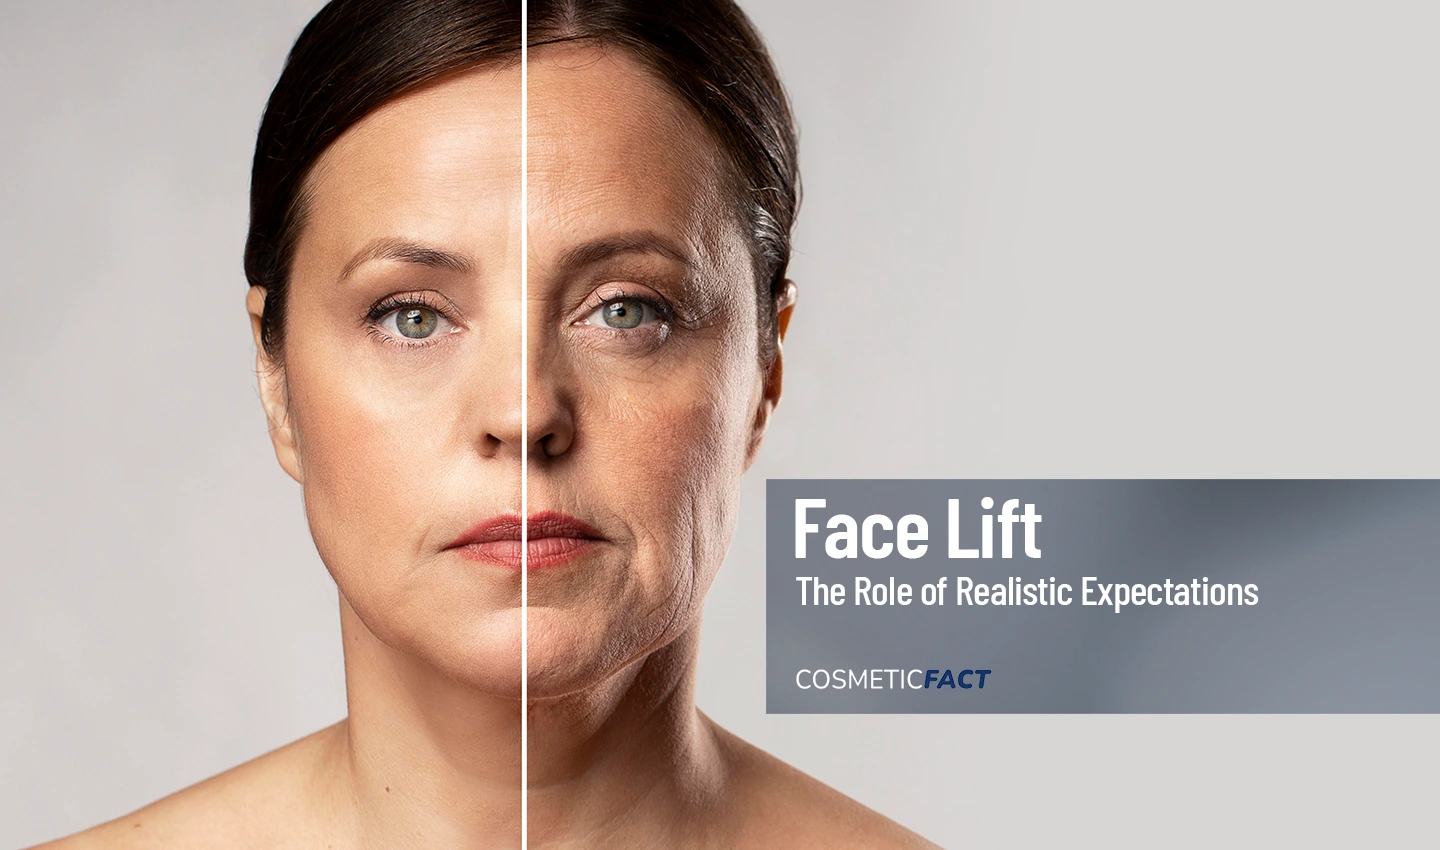 Before-and-after photo of a woman's face, with one side showing her before facelift surgery and the other side showing her after surgery resulted from realistic expectations.